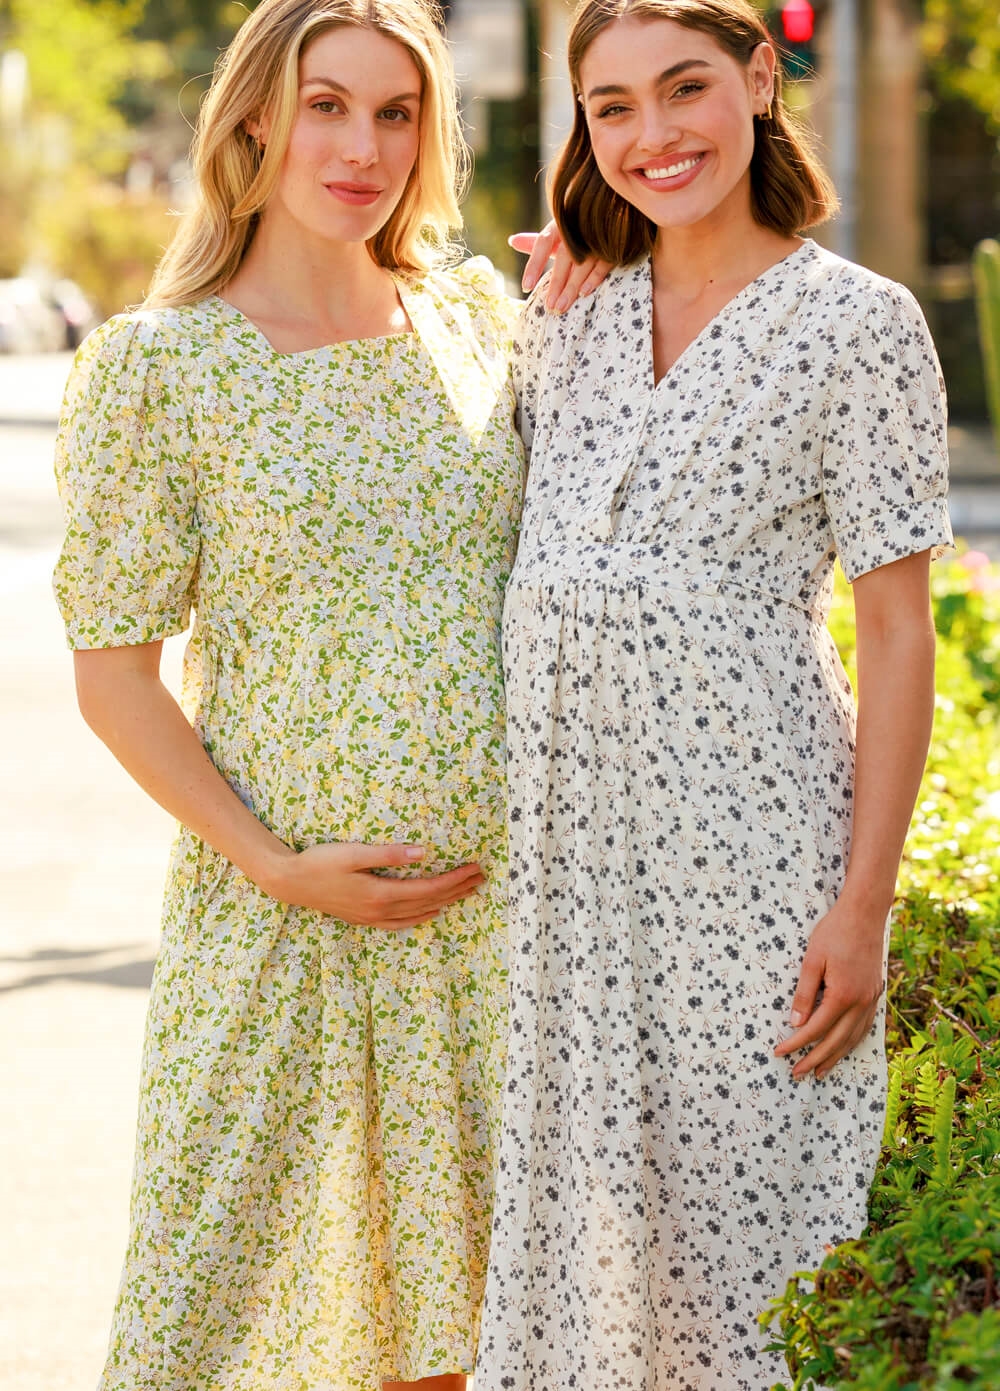 Lait & Co - Lea-Claire Maternity Dress in Yellow Floral